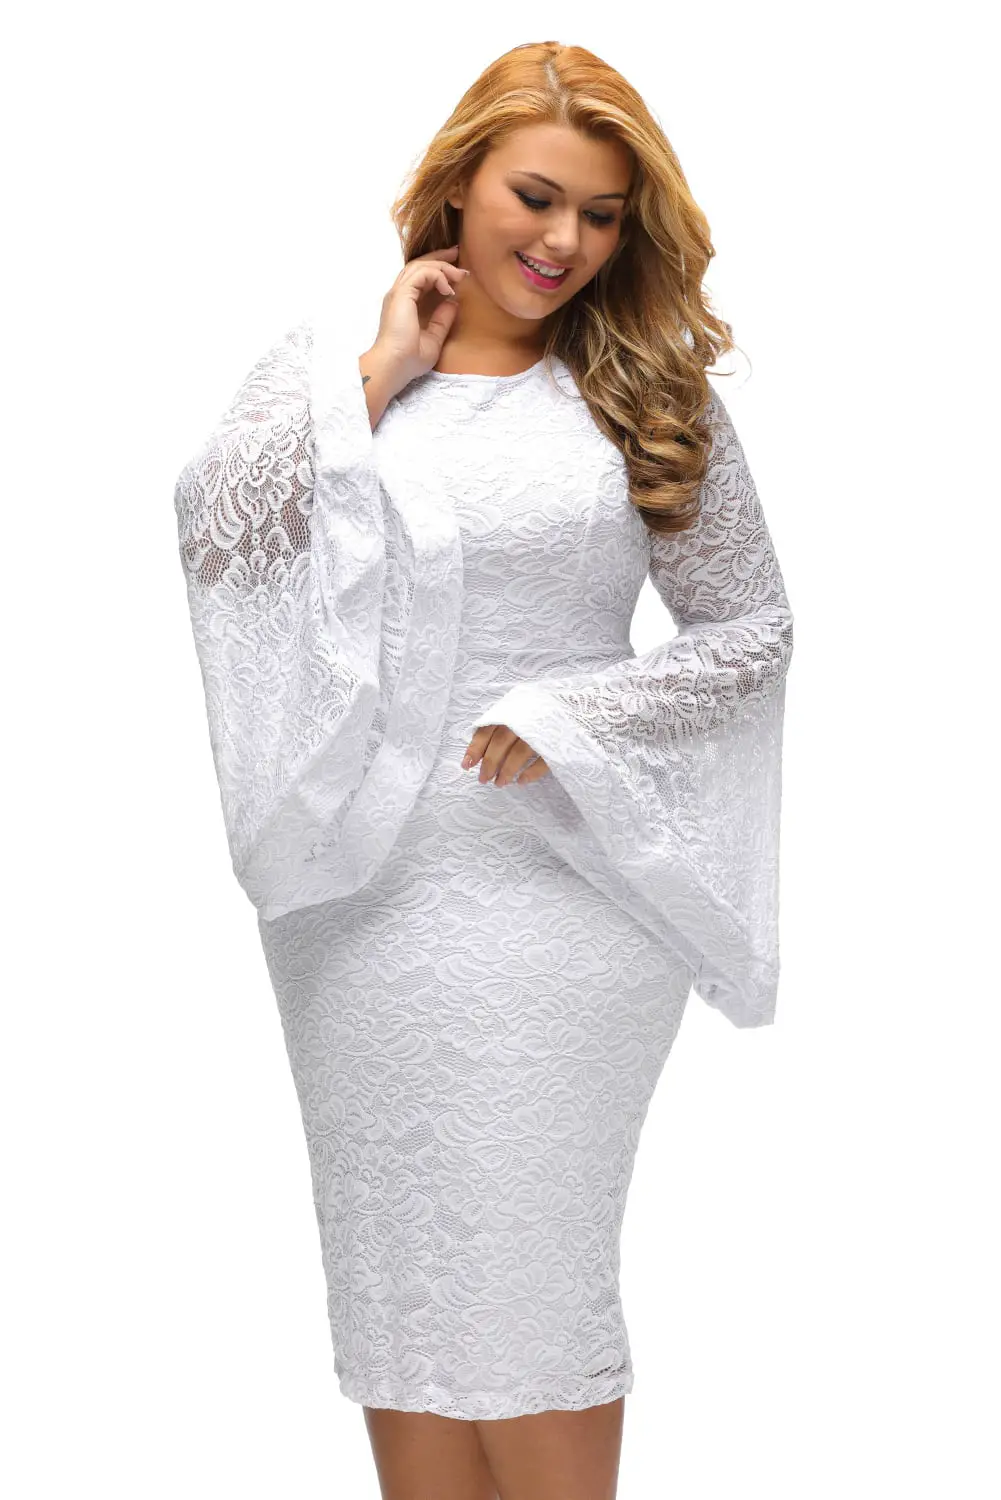 White-Plus-Size-Bell-Sleeves-Lace-Dress-LC61396-1-6 - CurvyPlus